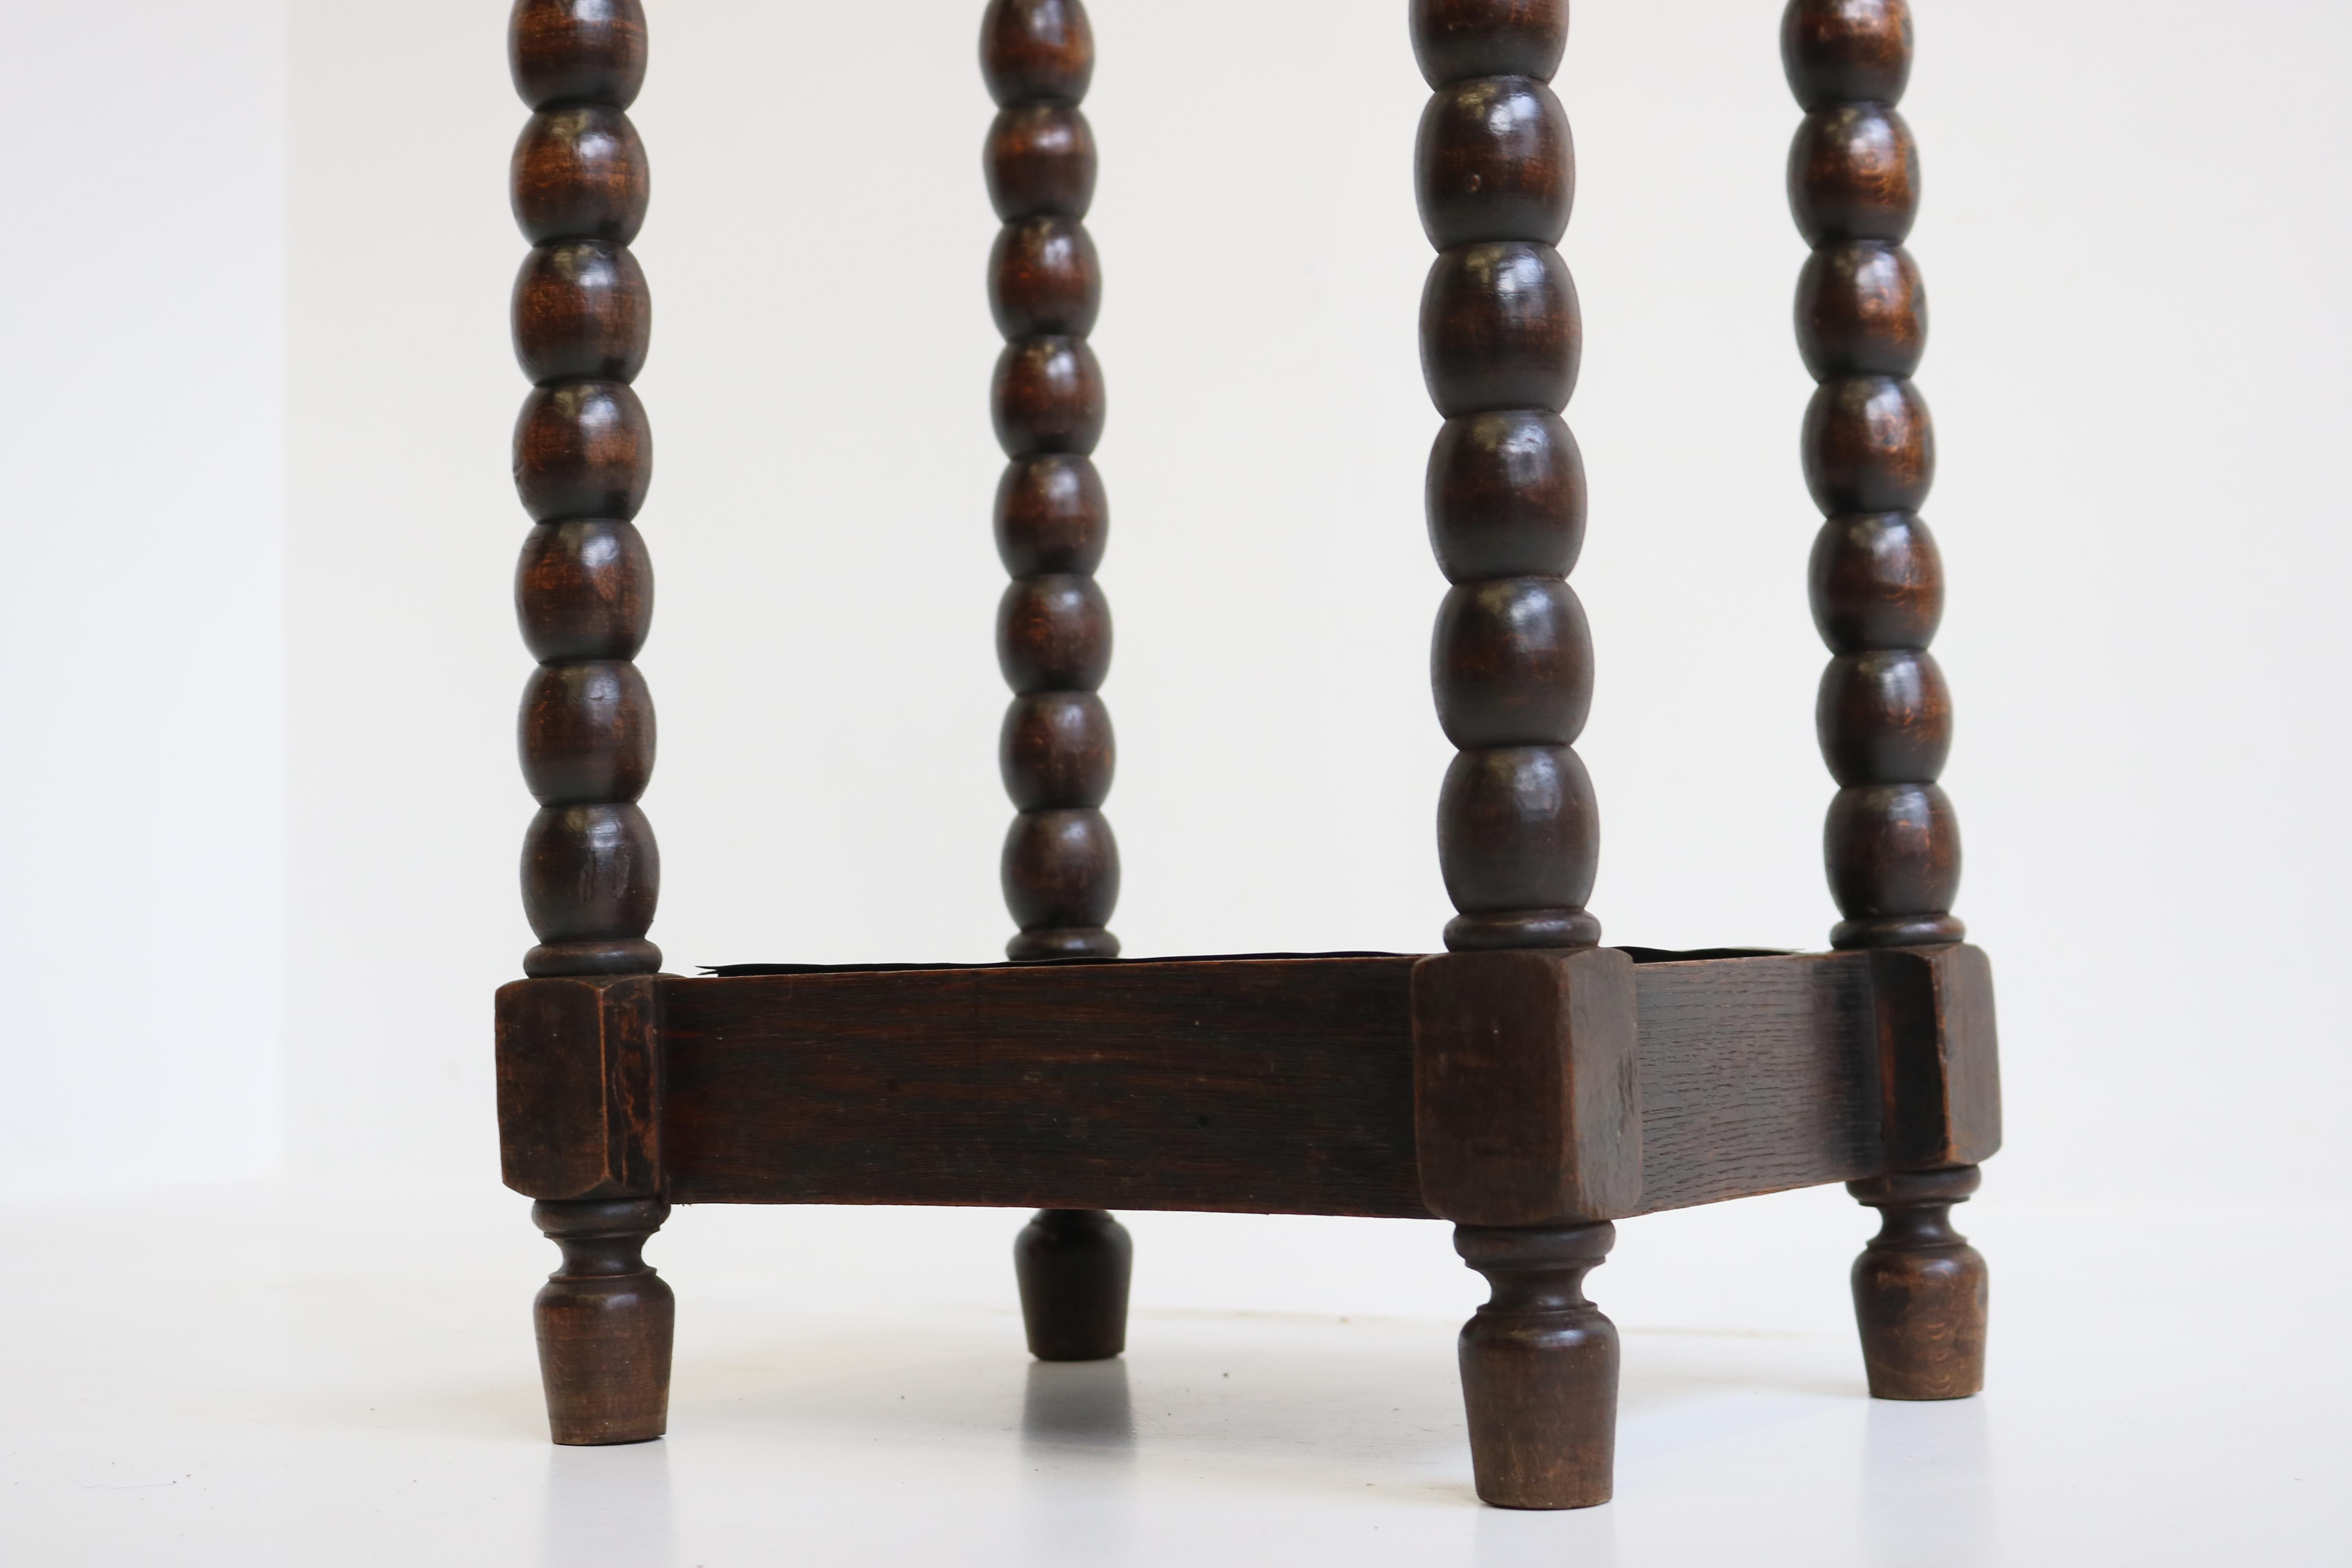 Rare antique French Renaissance Revival umbrella stand / stick holder from the 19th century in solid oak. 
Decorated your hallway with this marvelous antique piece. Hand carved balls (very similar to barley twist) with 2 Lion heads on top. 
The 2